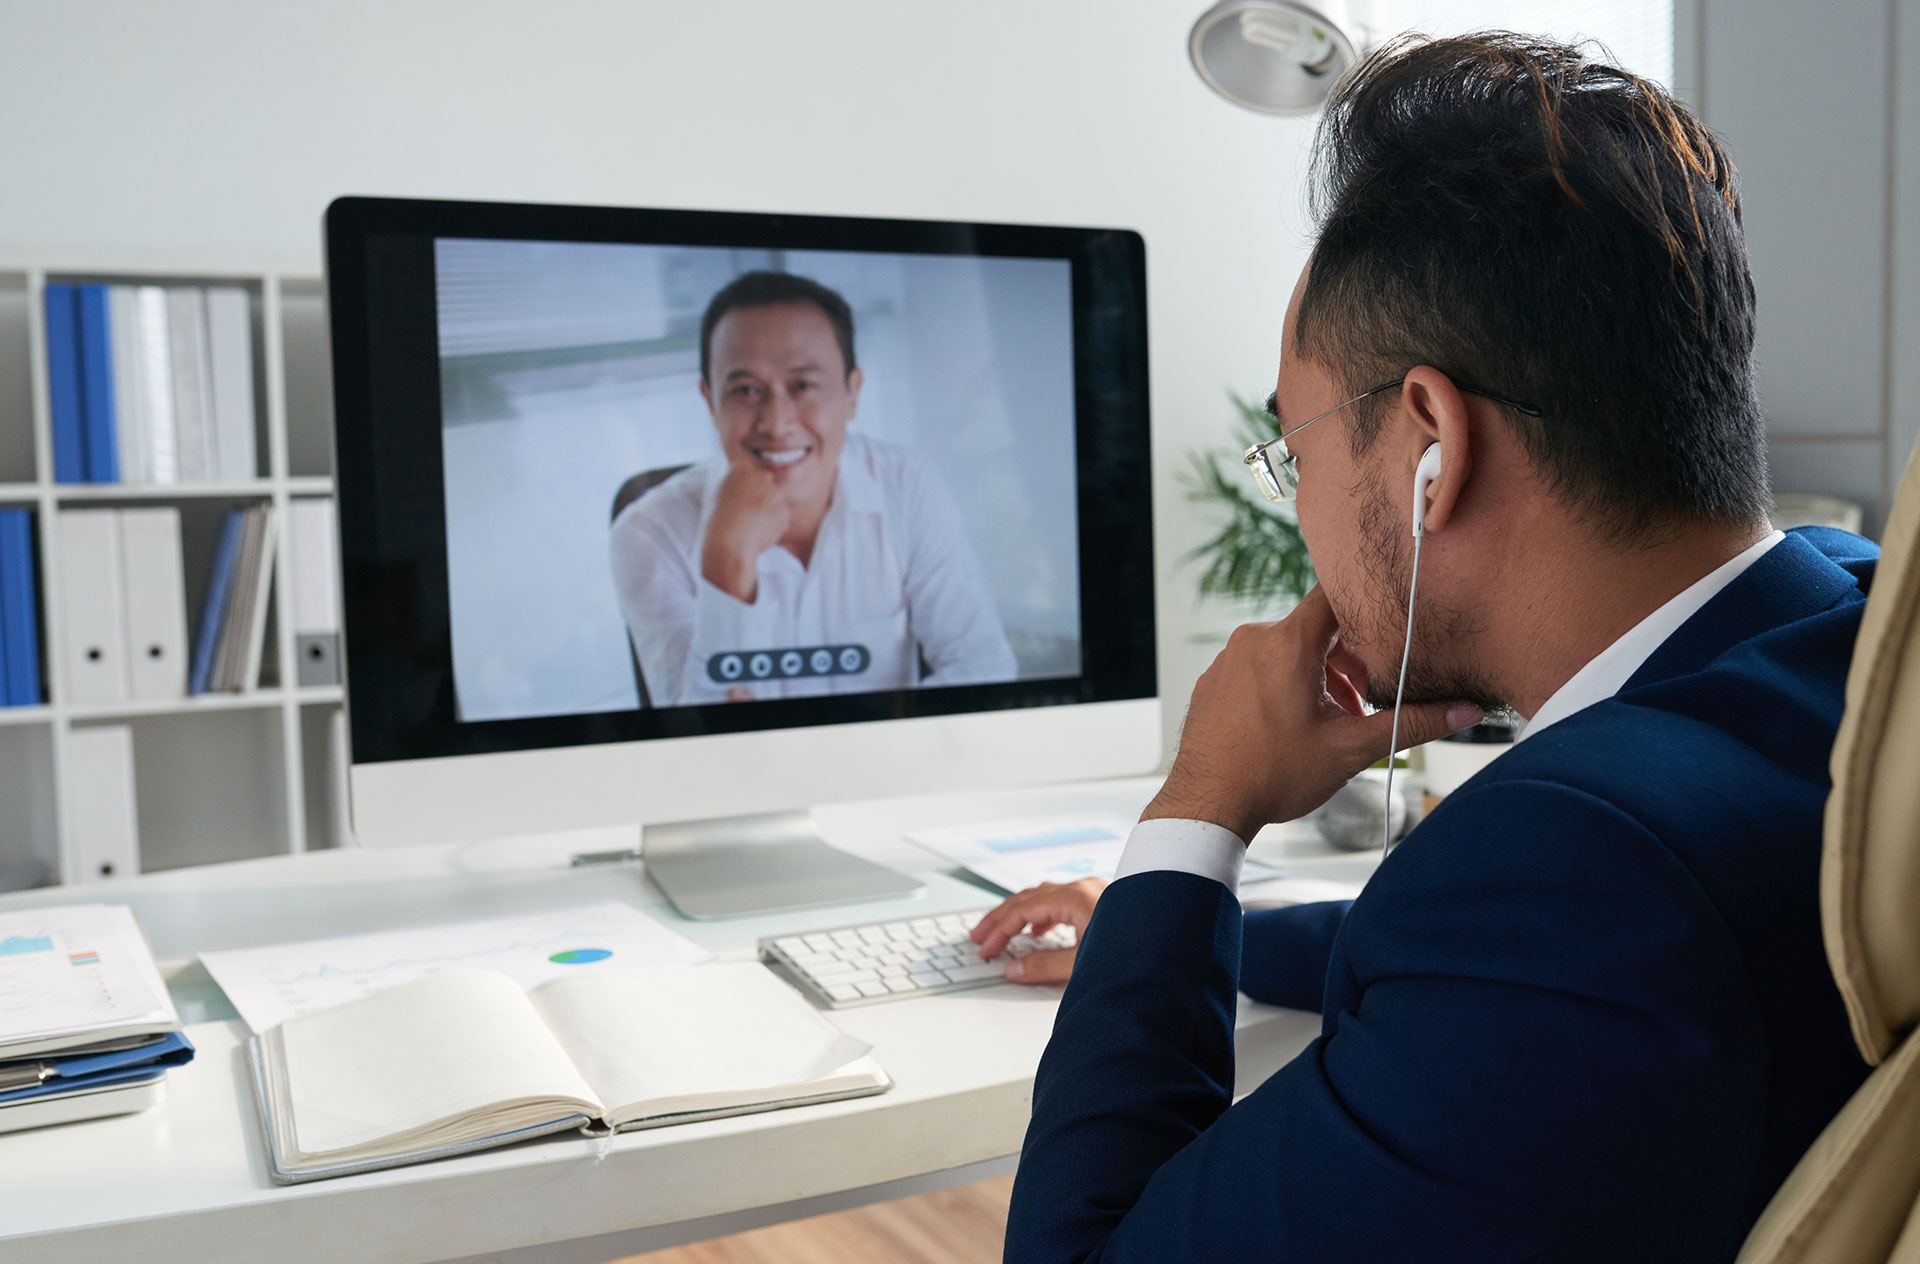 Free Video Conferencing Tools to Keep You Connected